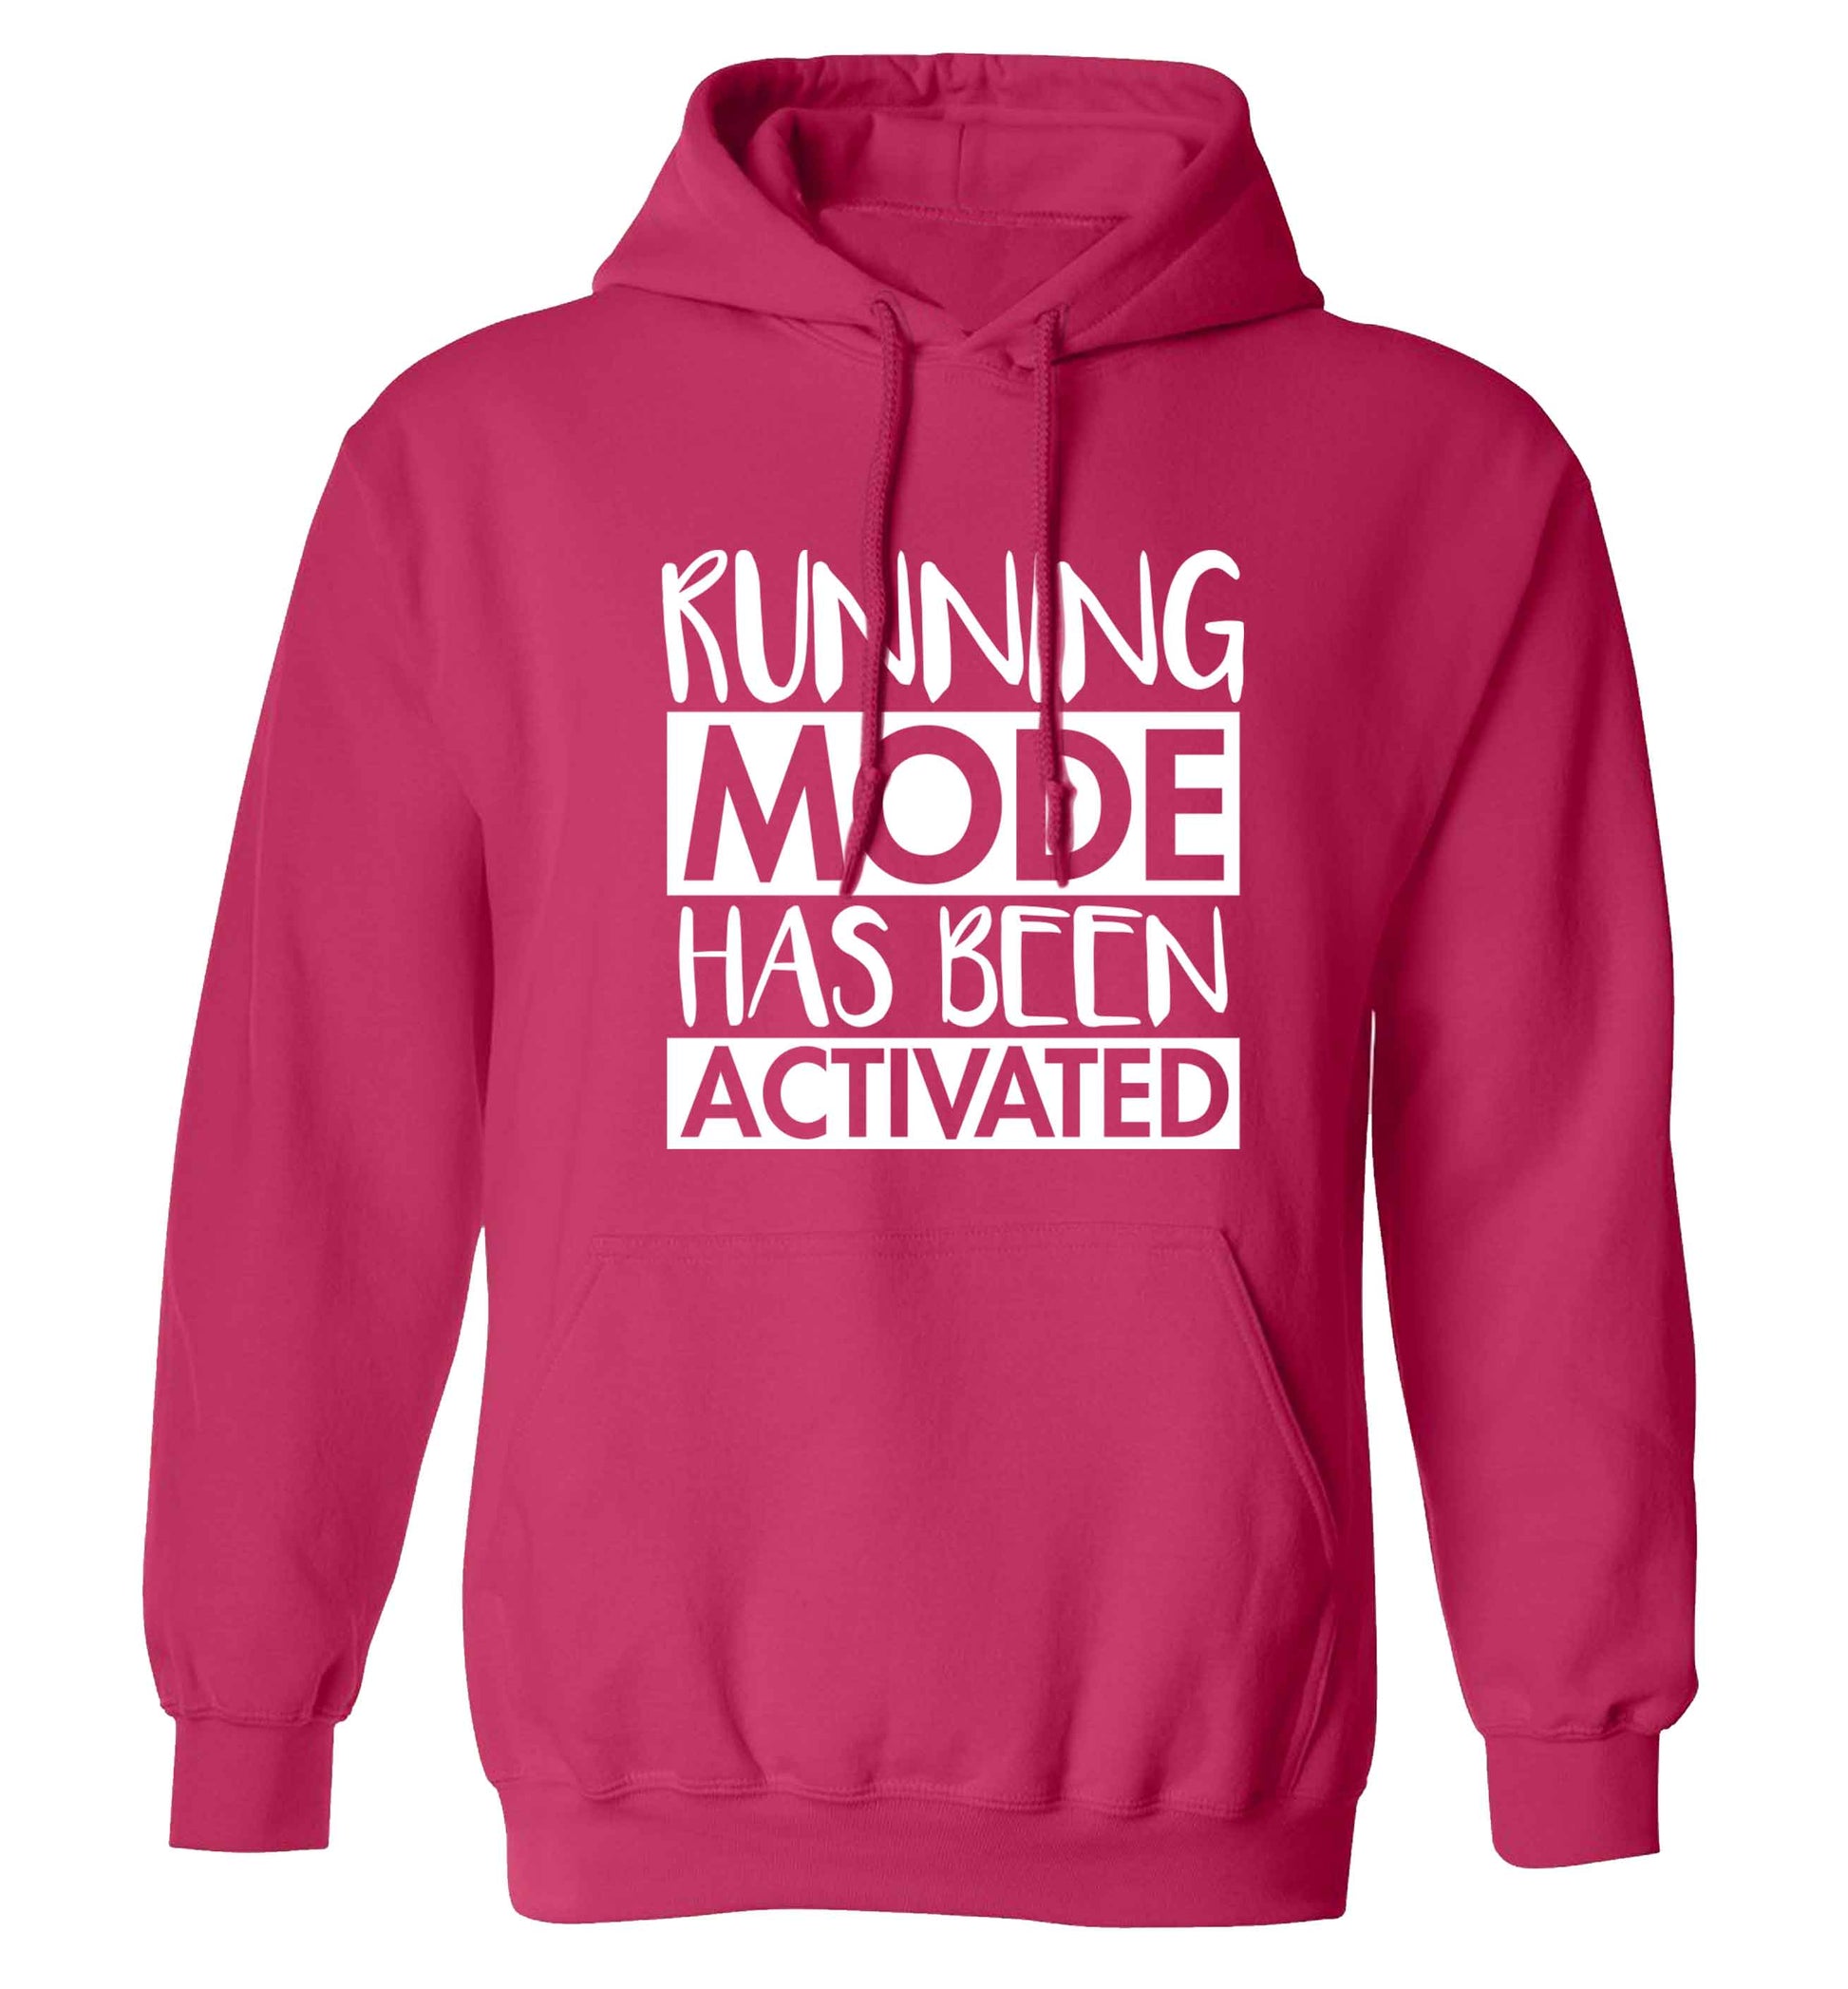 Running mode has been activated adults unisex pink hoodie 2XL